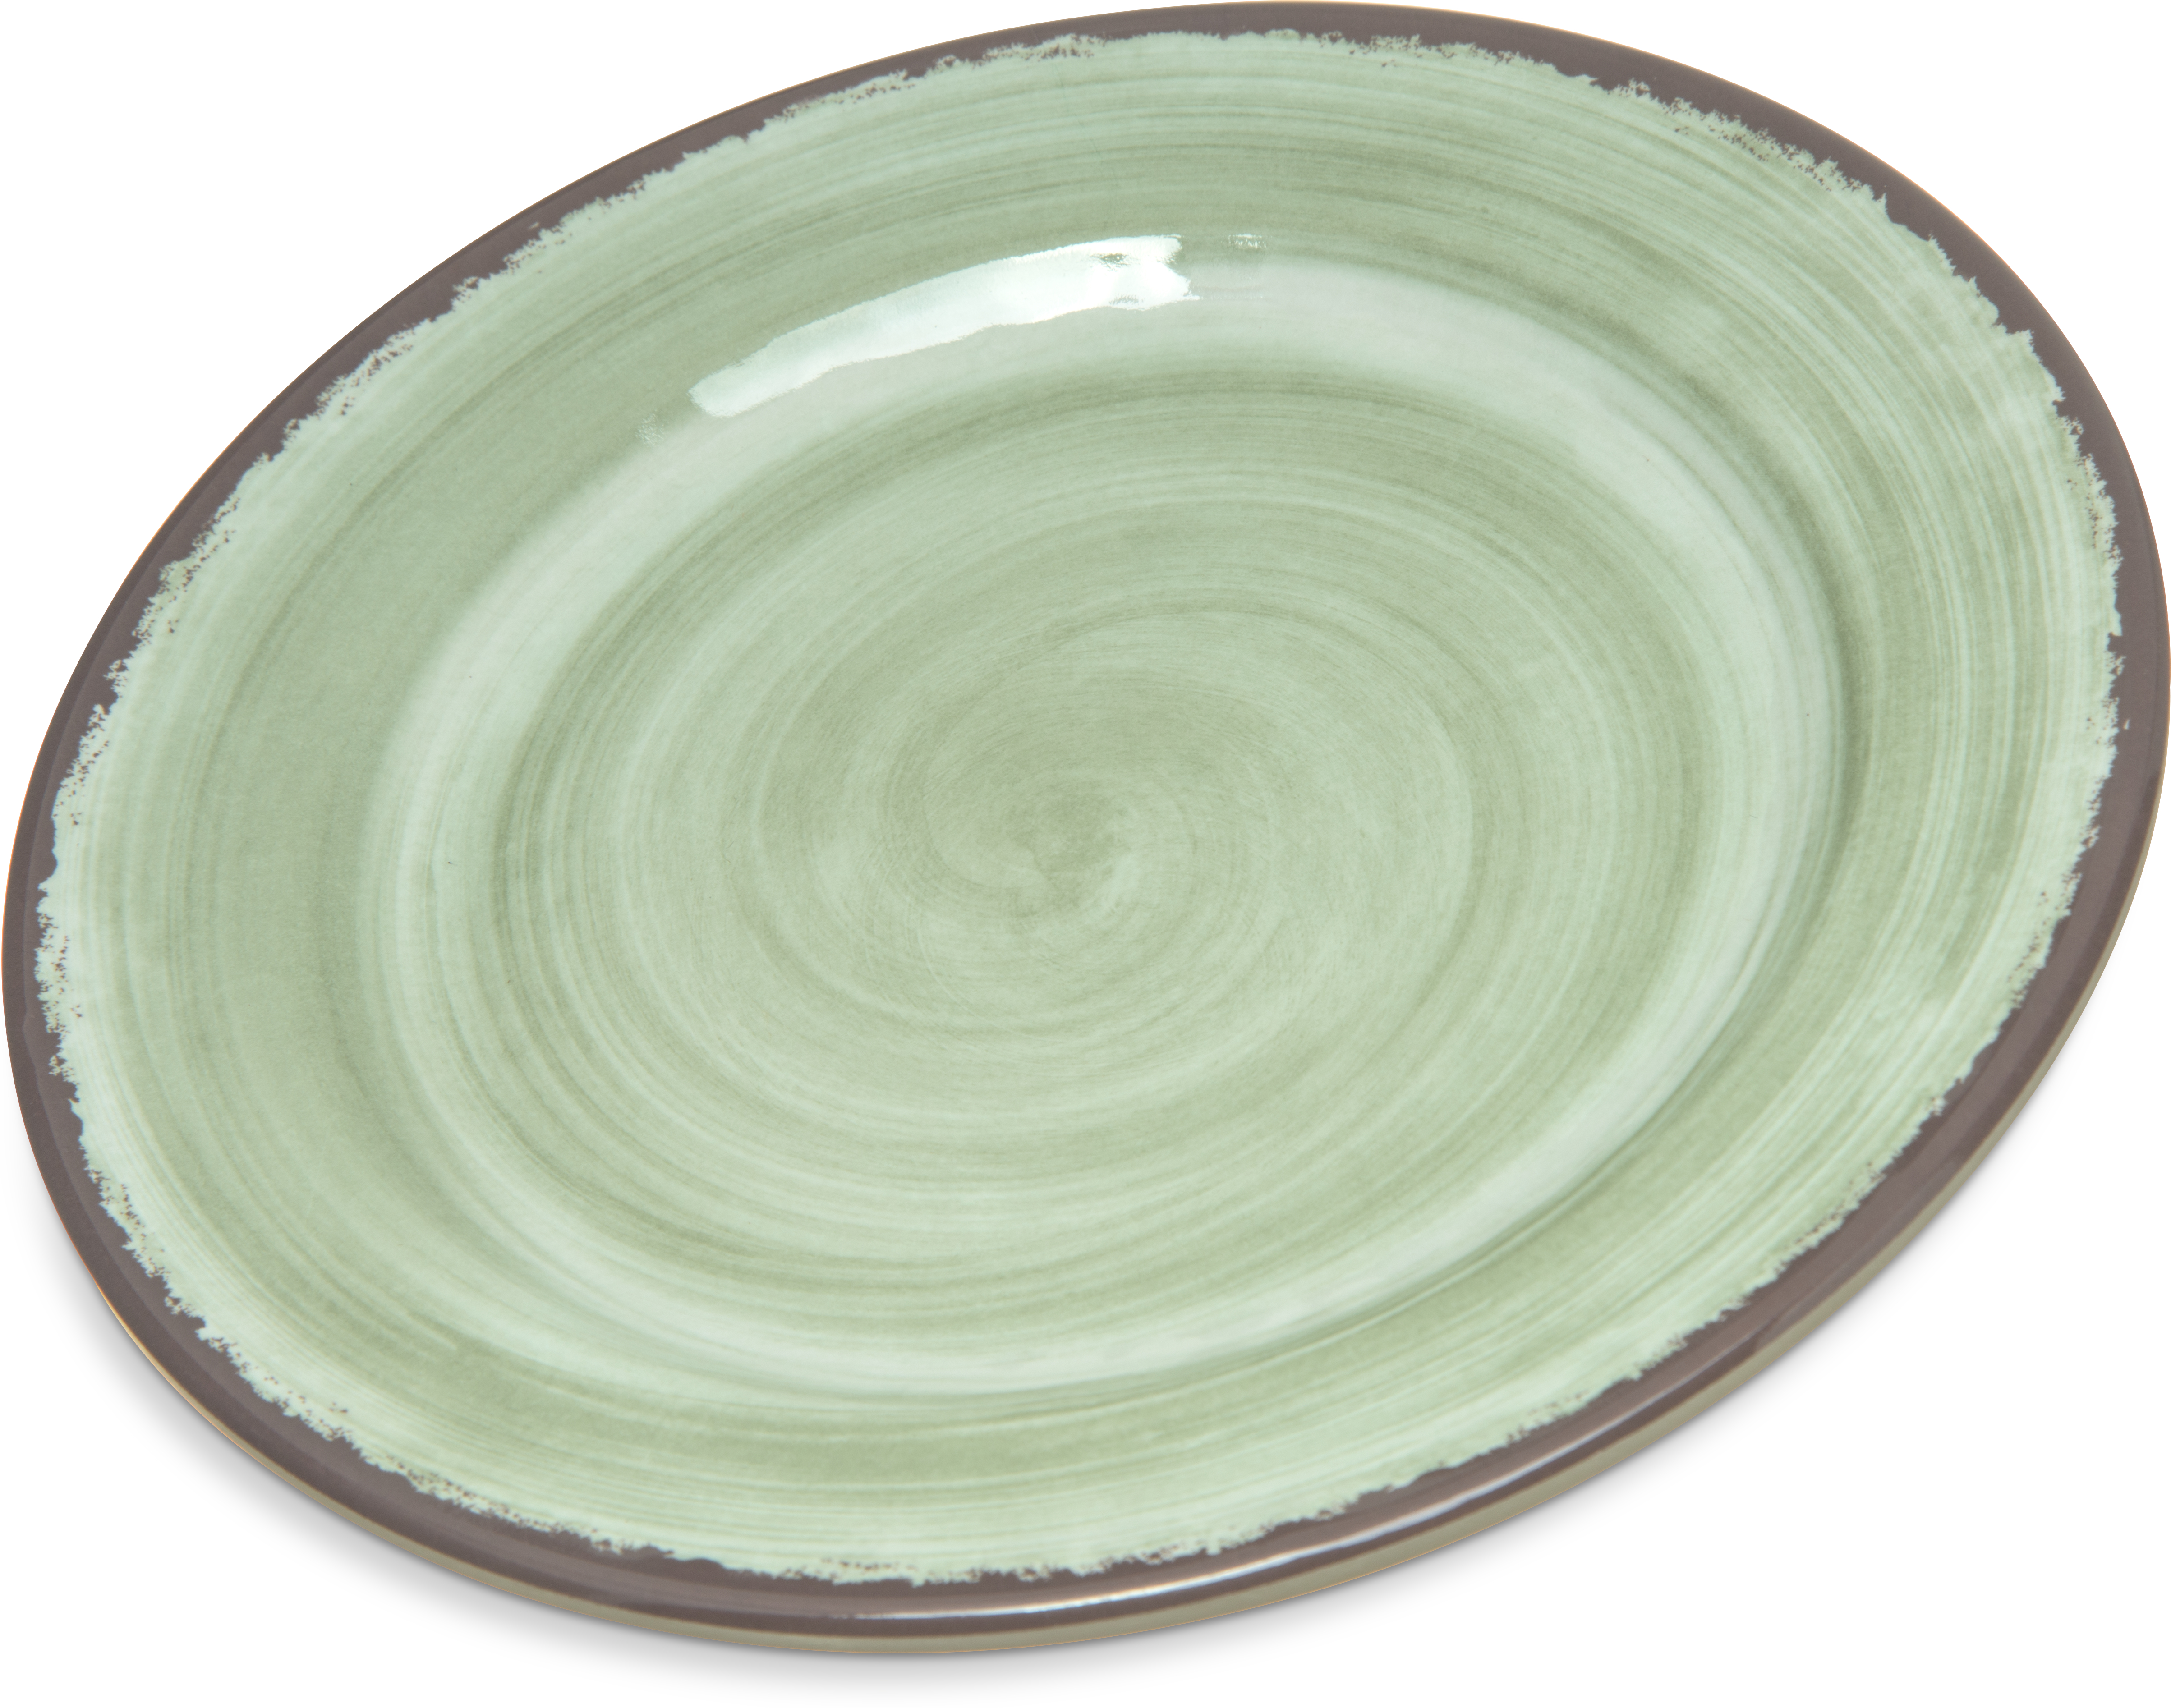 Mingle Melamine Bread And Butter Plate 7 - Jade